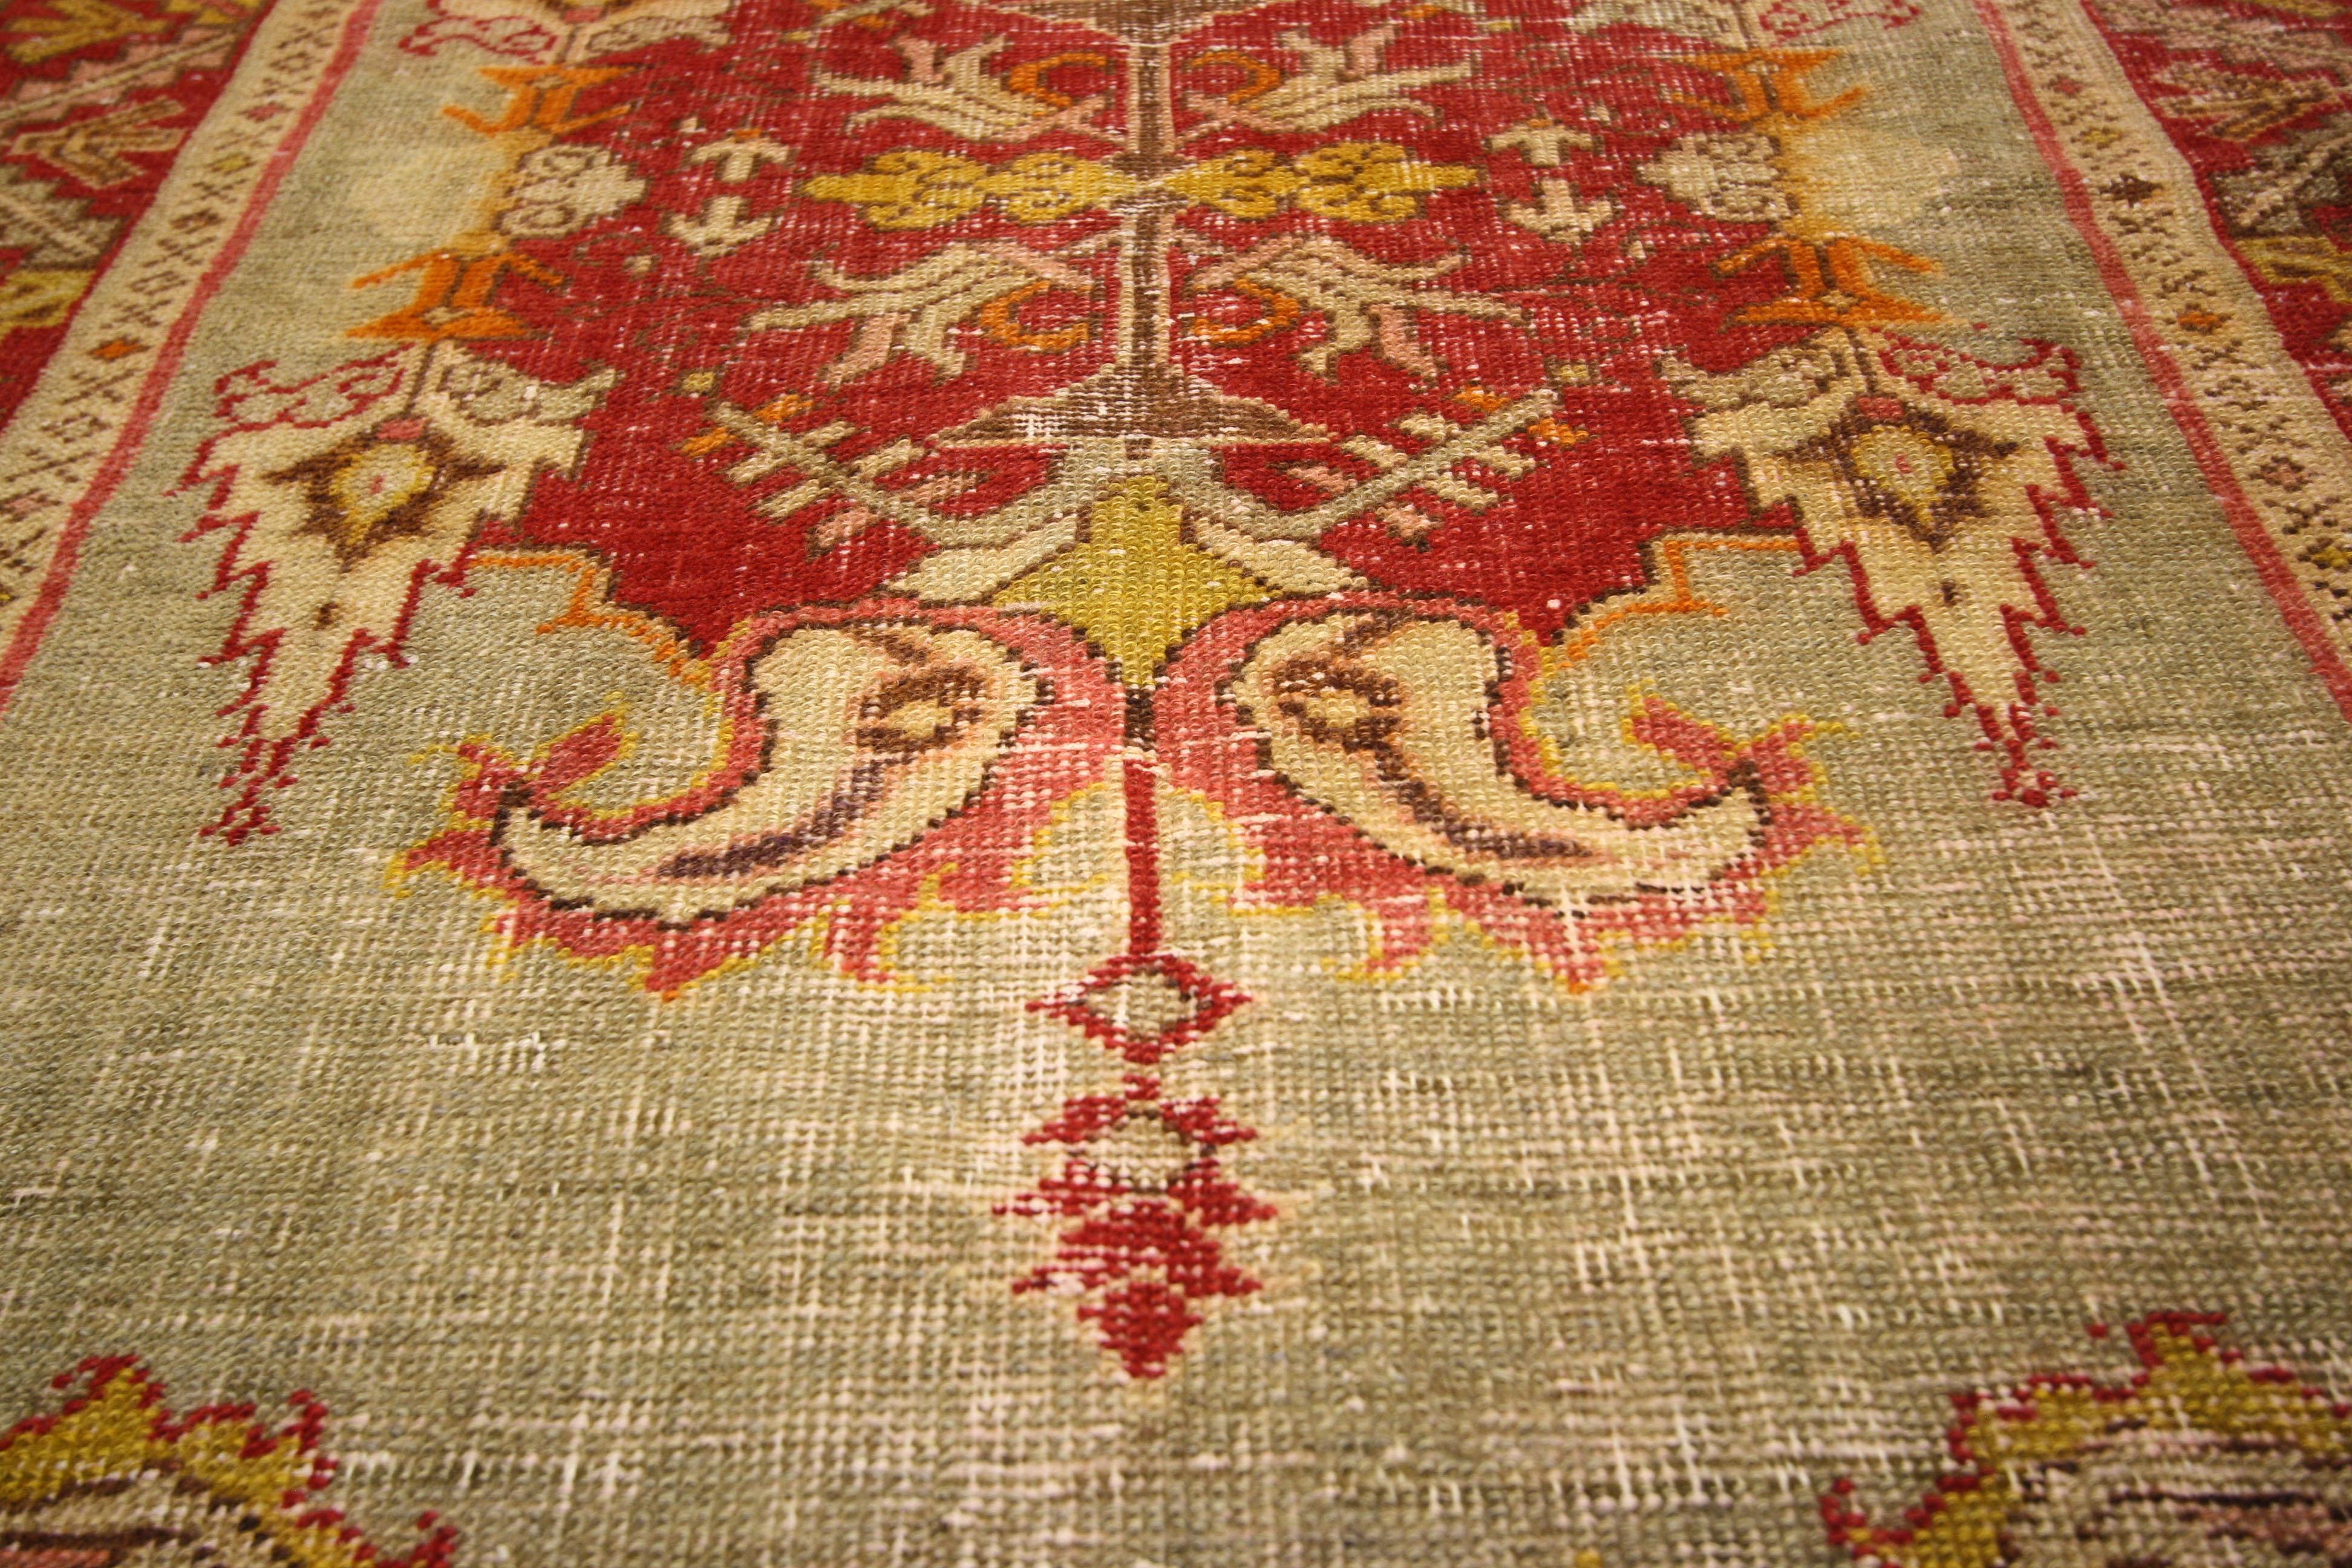 52340, Rustic style distressed vintage Turkish Oushak rug. Marvellously ornamented with a rustic style, this tastefully distressed vintage Oushak rug is a compelling example of Turkish weaving. An elaborate red and gold medallion anchors an